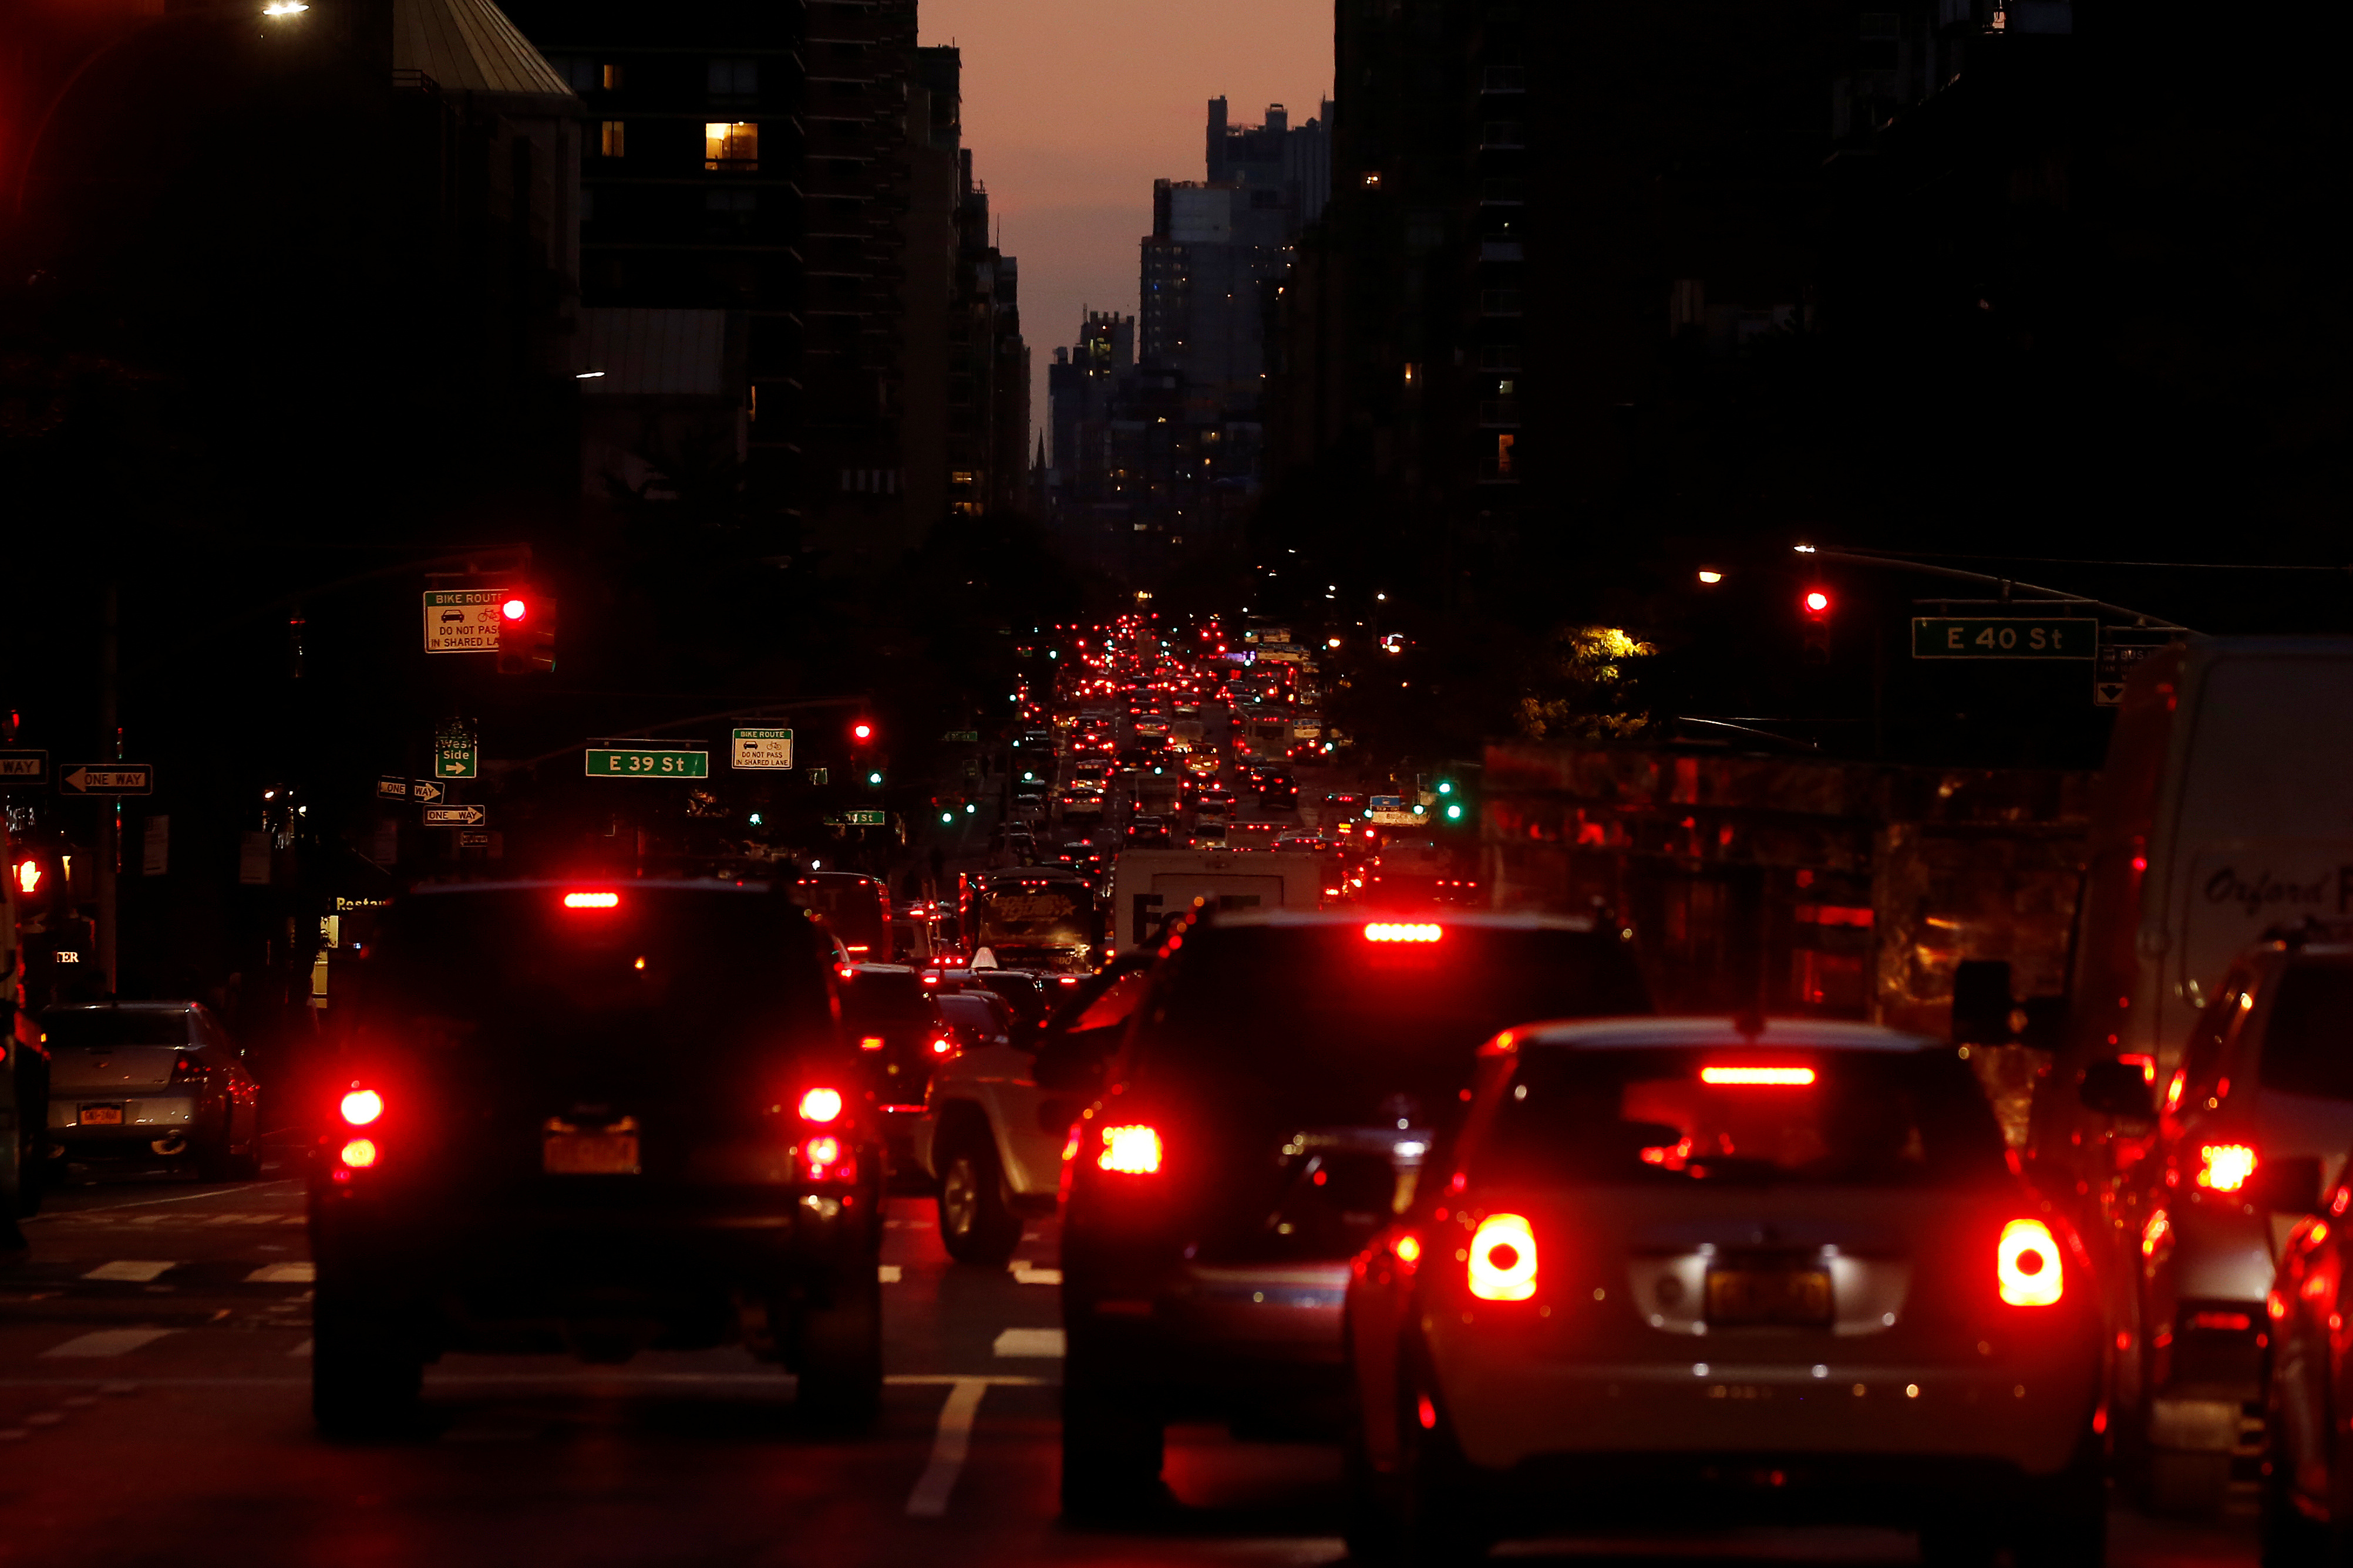 Red tail lights light up 2nd Ave as cars and trucks head downtown at sunset in the Manhattan borough of New York